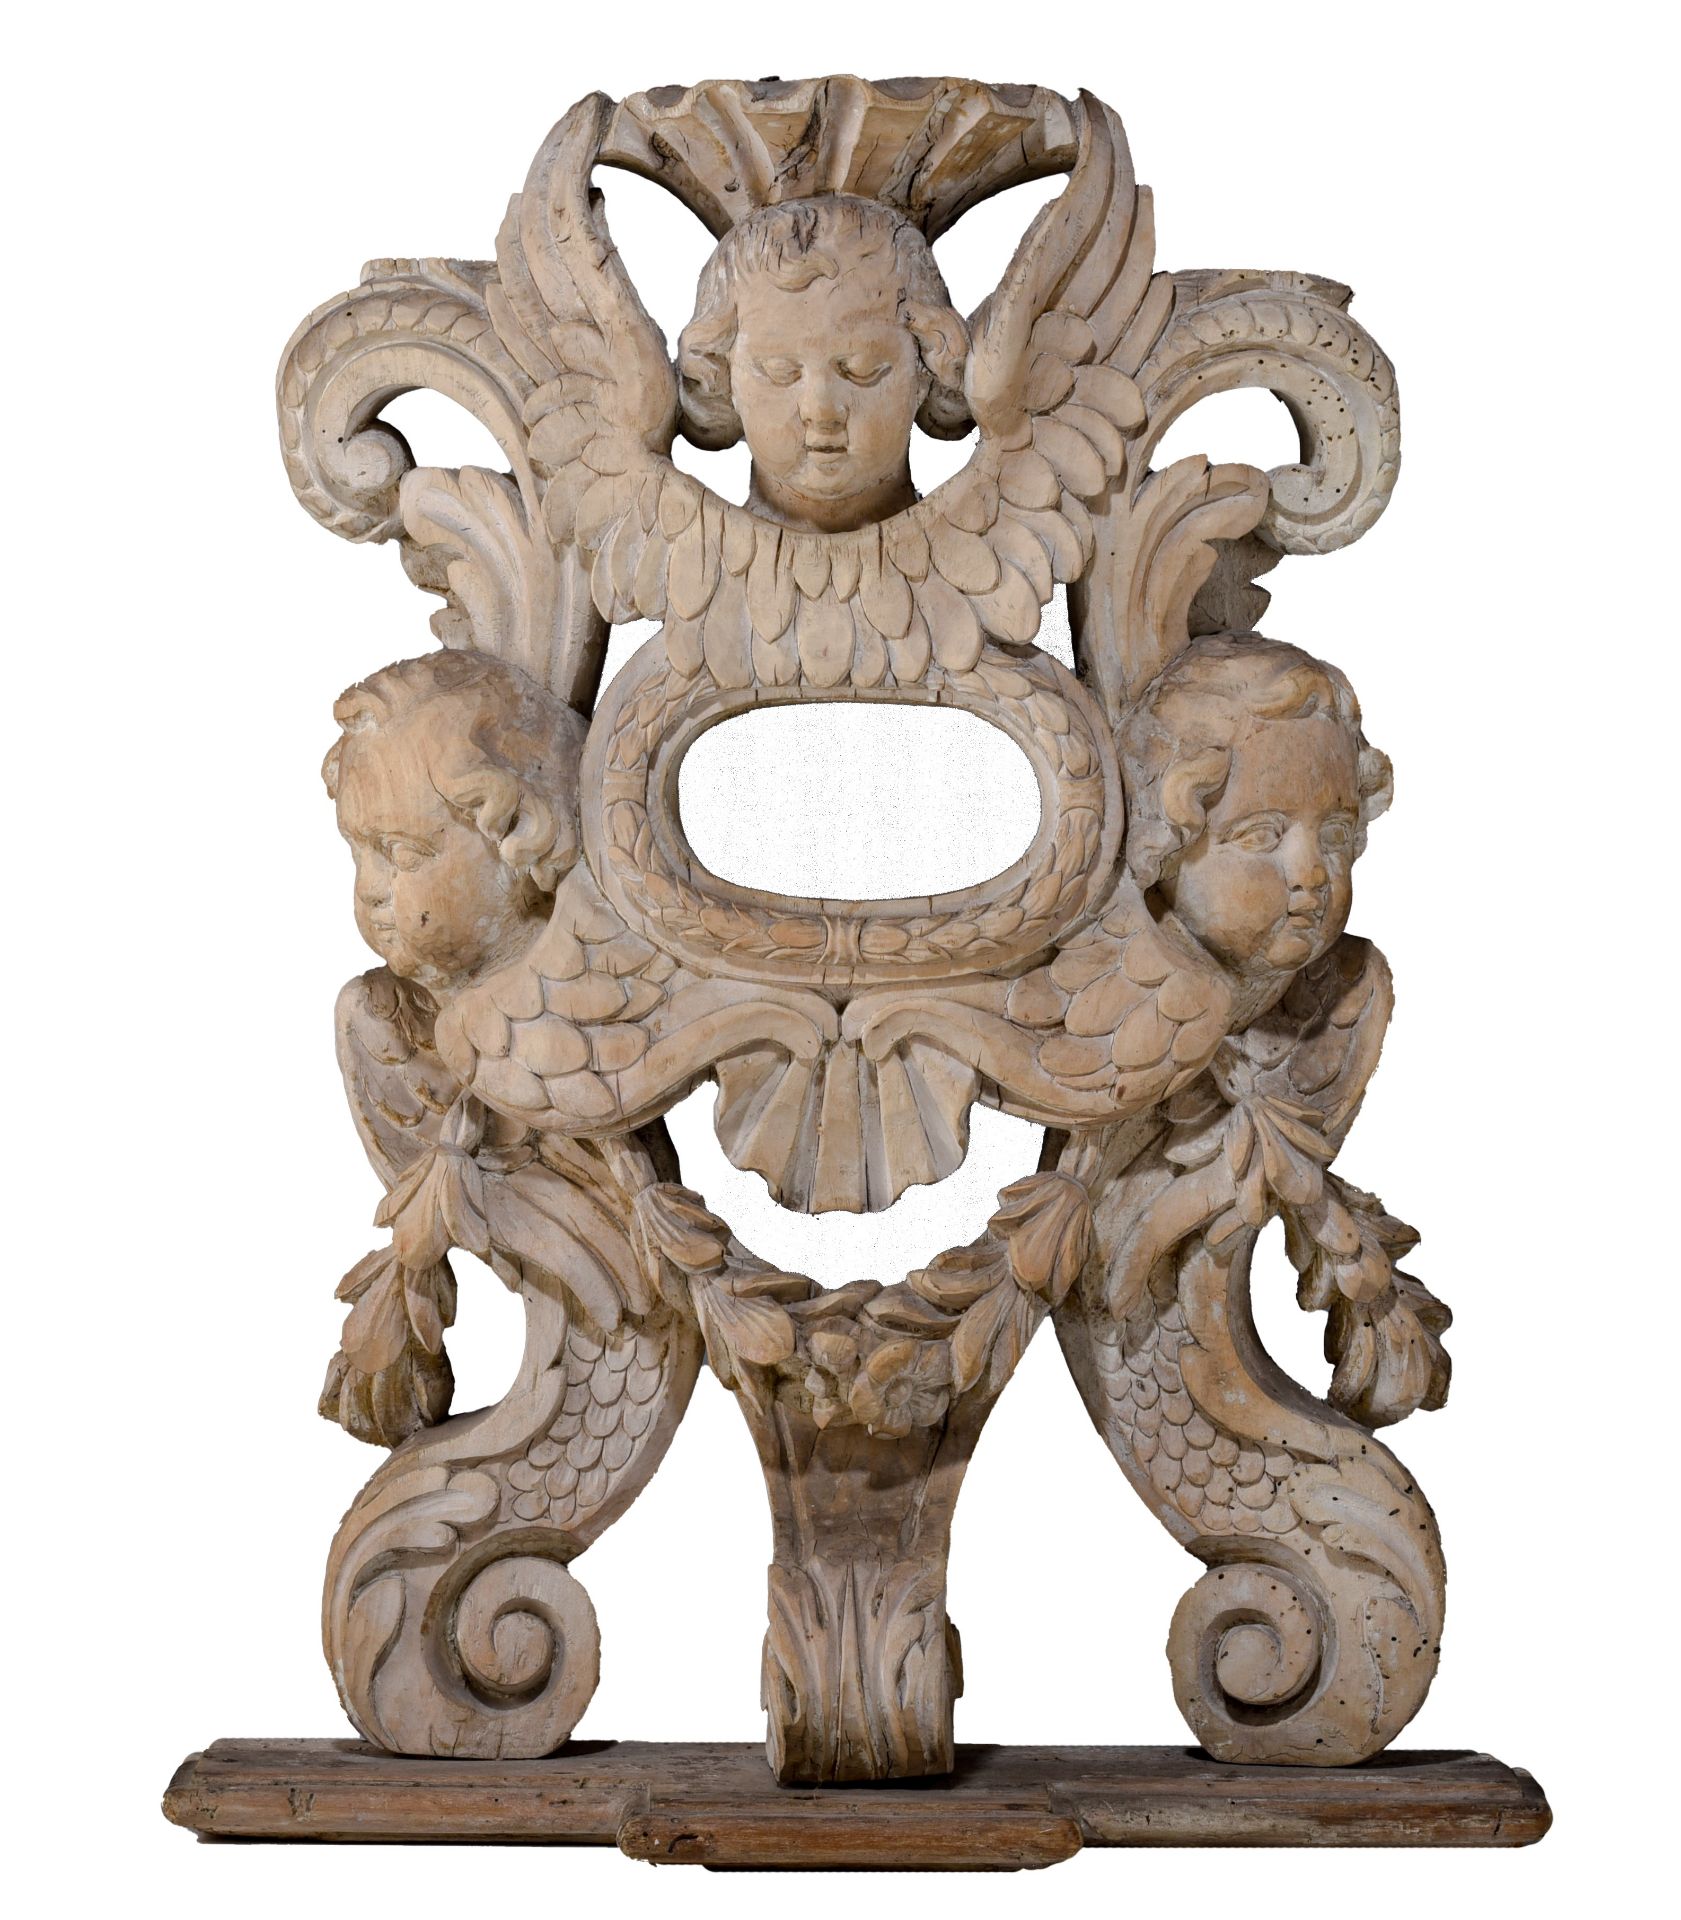 (BIDDING ONLY ON CARLOBONTE.BE) A Baroque richly carved limewood crucifix stand, H 56 cm - Image 2 of 10